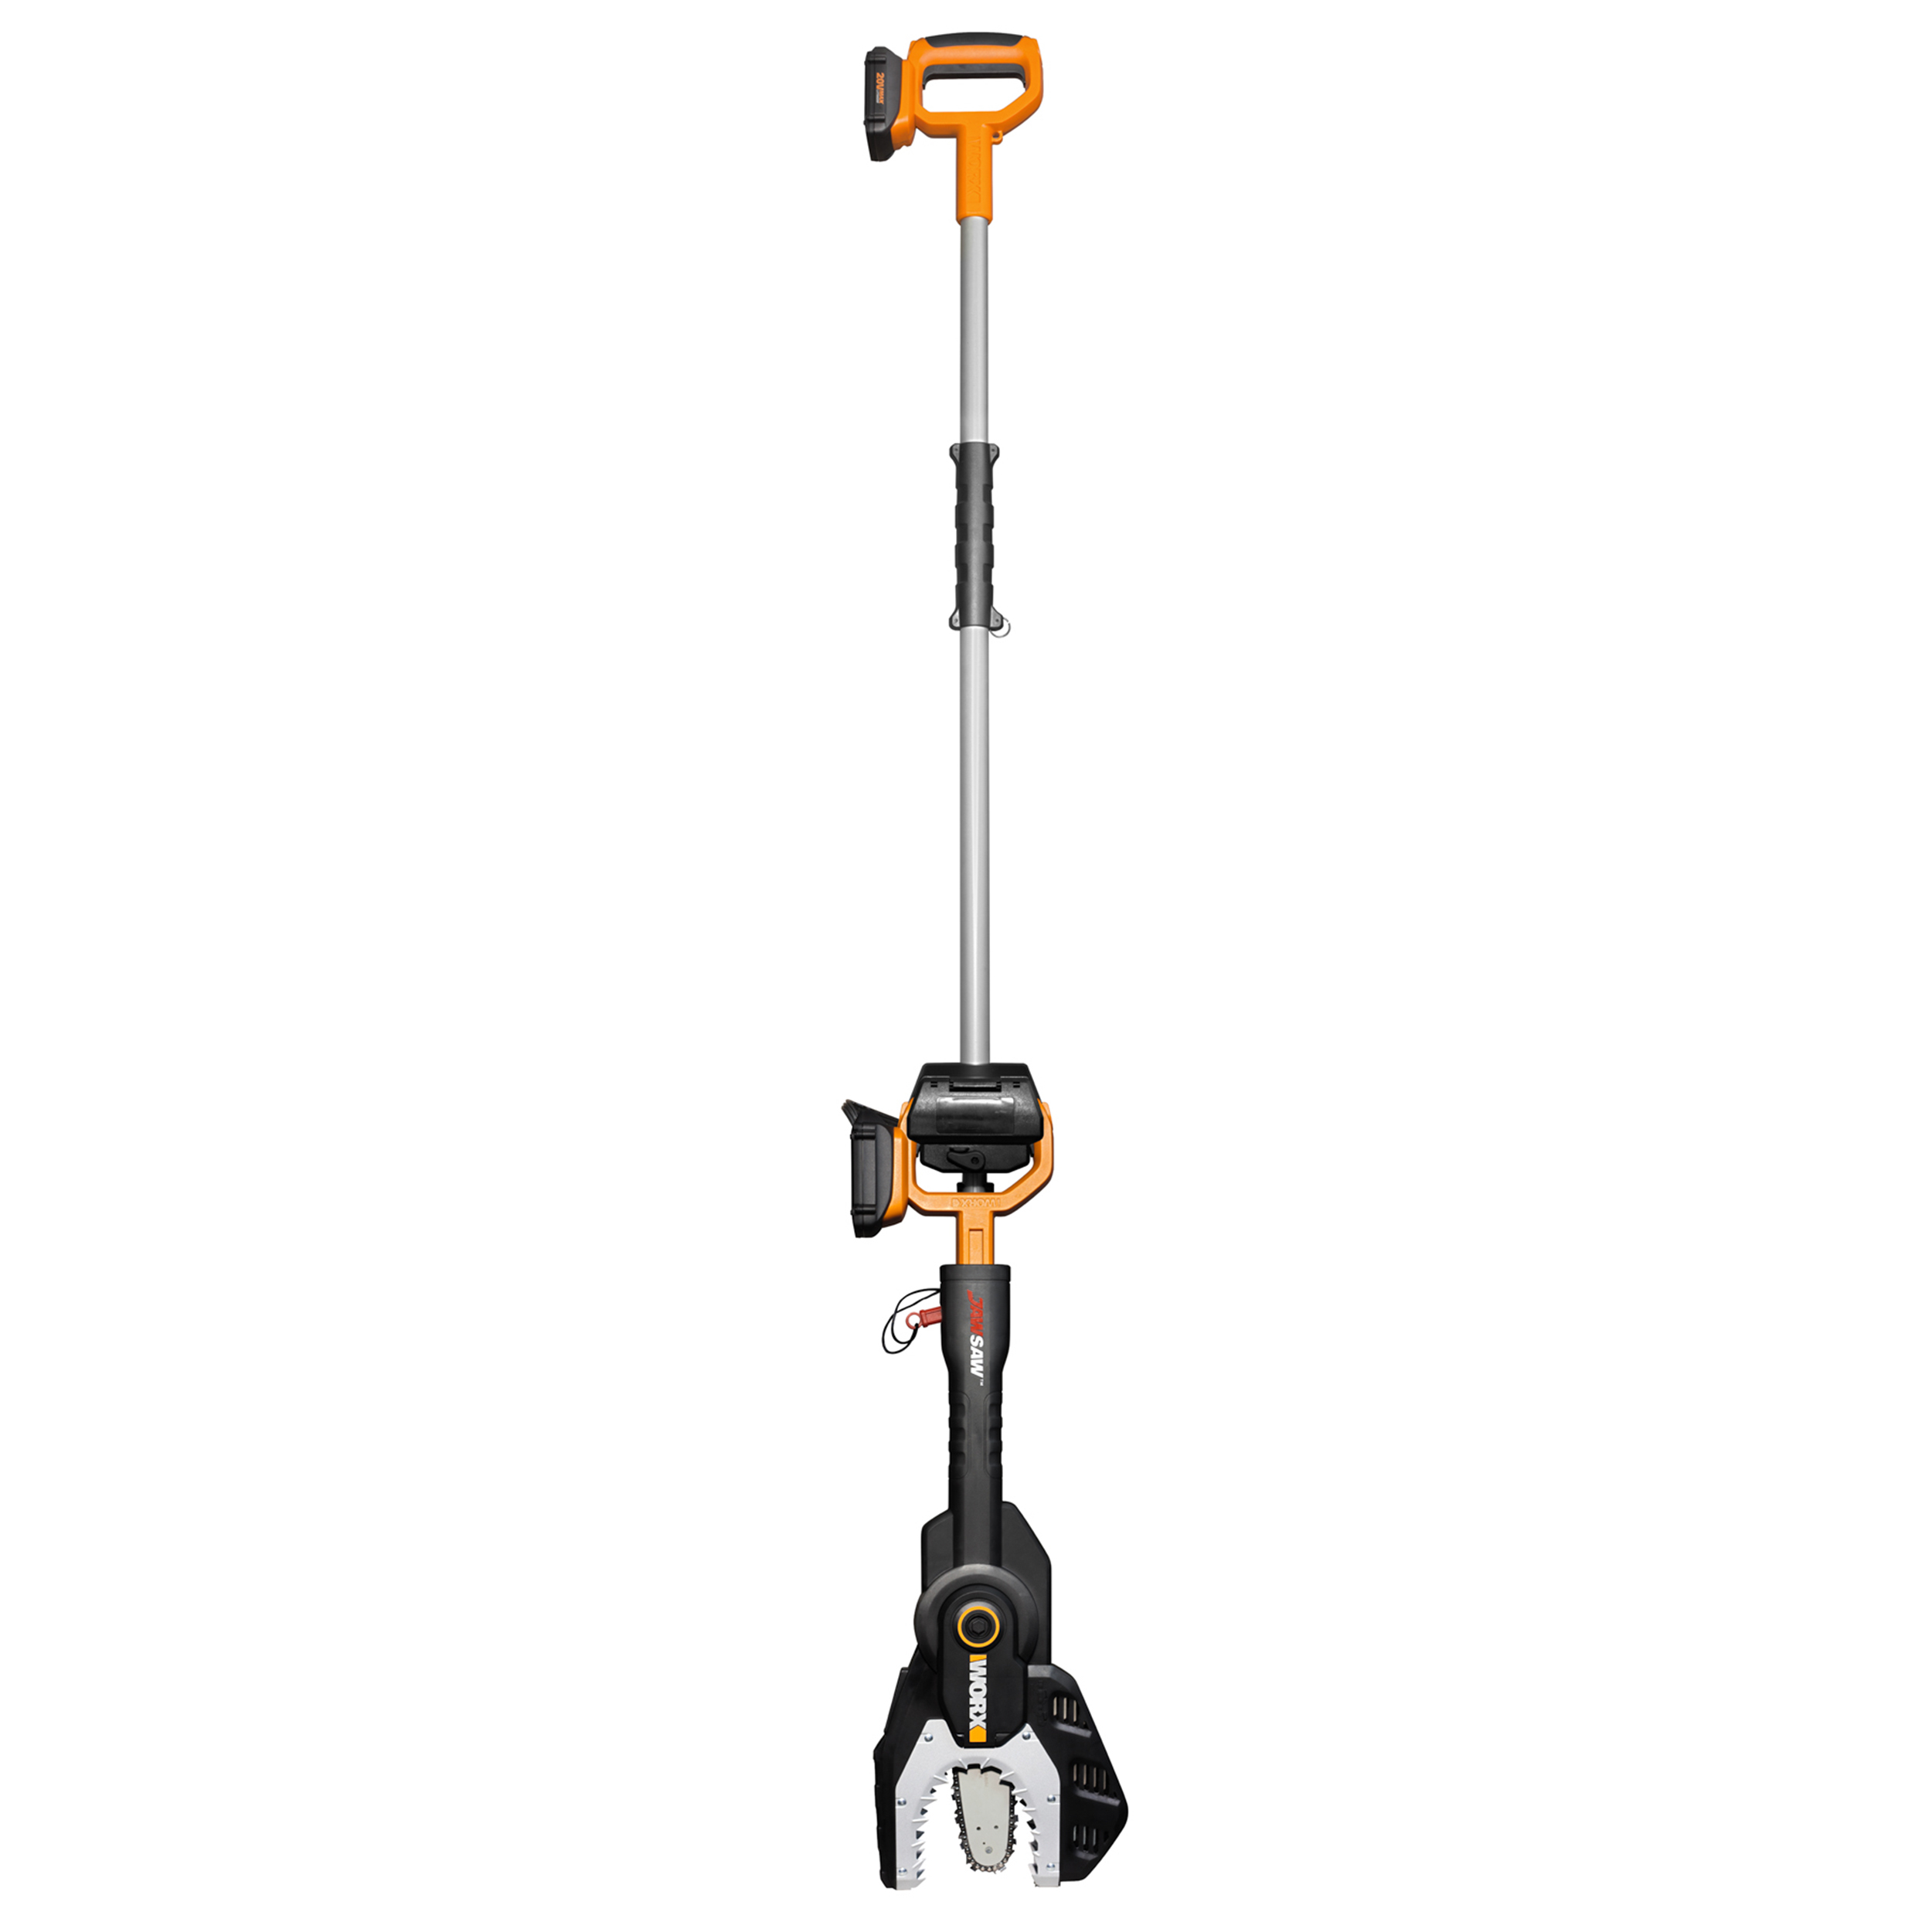 Jawsaw 20v Max Lithium Cordless With Extension Pole